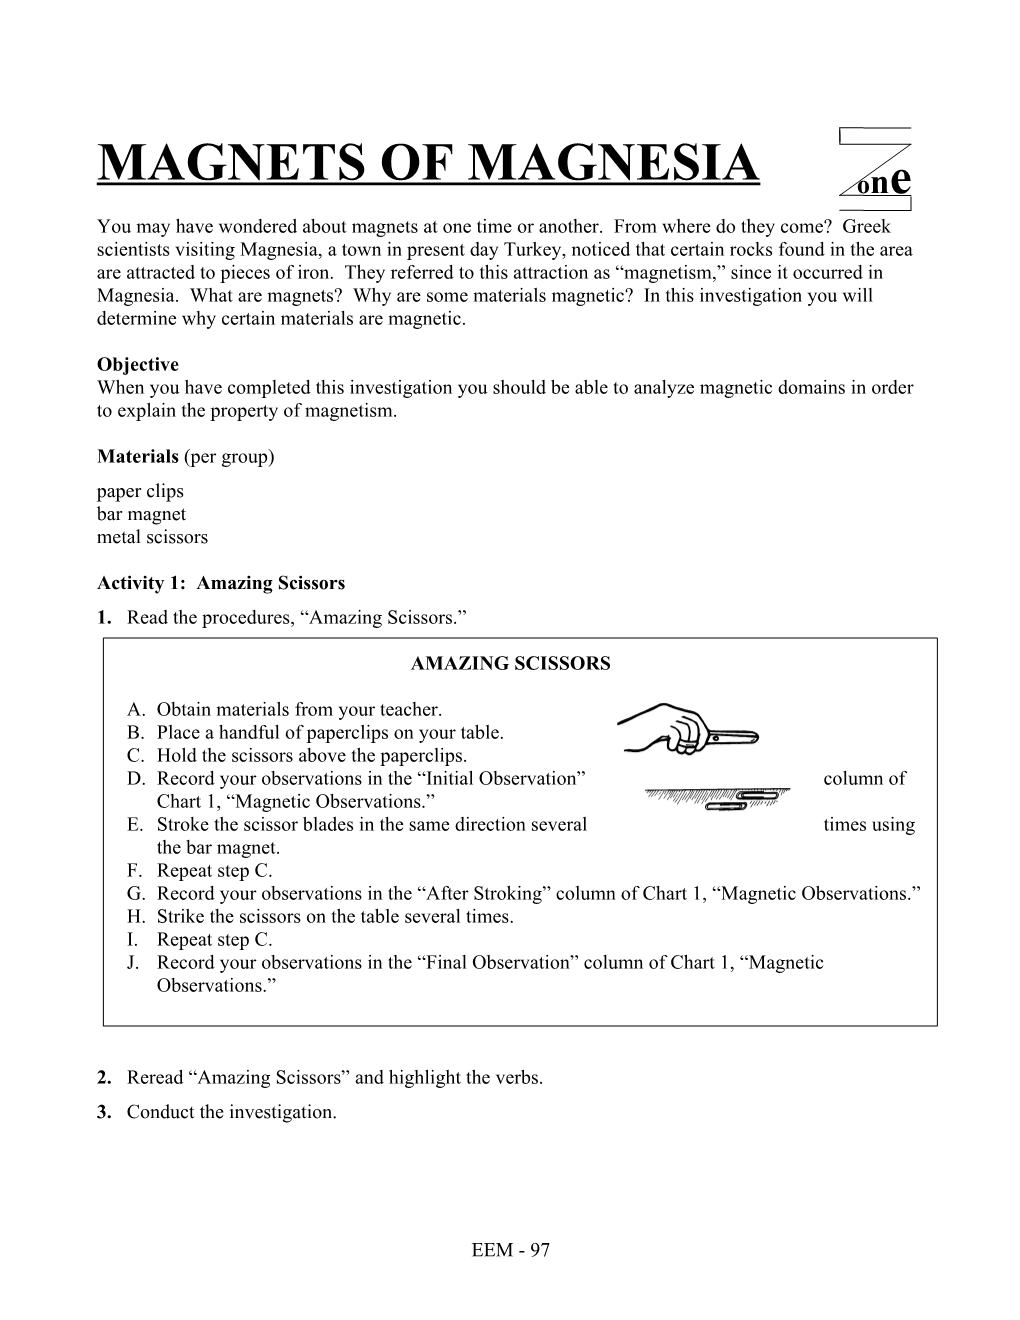 Magnets of Magnesia